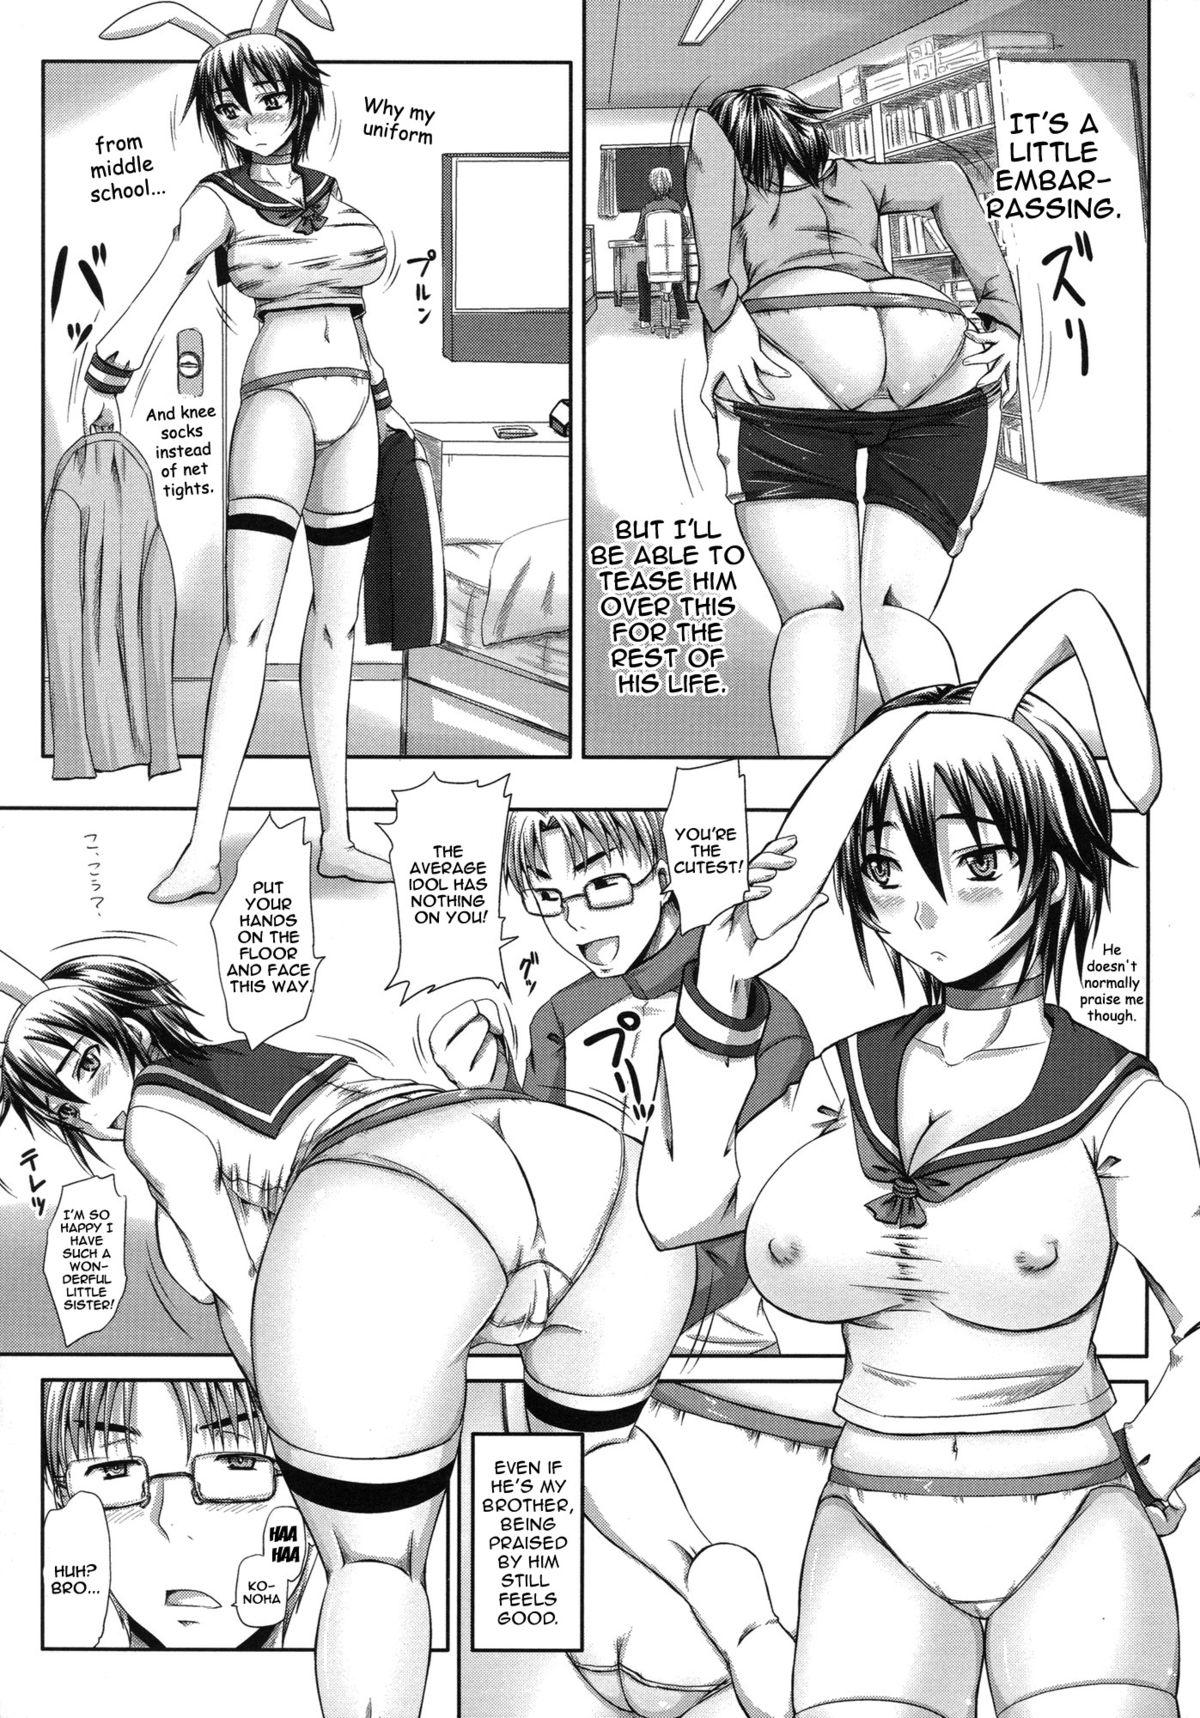 [Akigami Satoru] Tsukurou! Onaho Ane - Let's made a Sex Sleeve from Sister | Turning My Elder-Sister into a Sex-Sleeve [English] {doujin-moe.us} 160